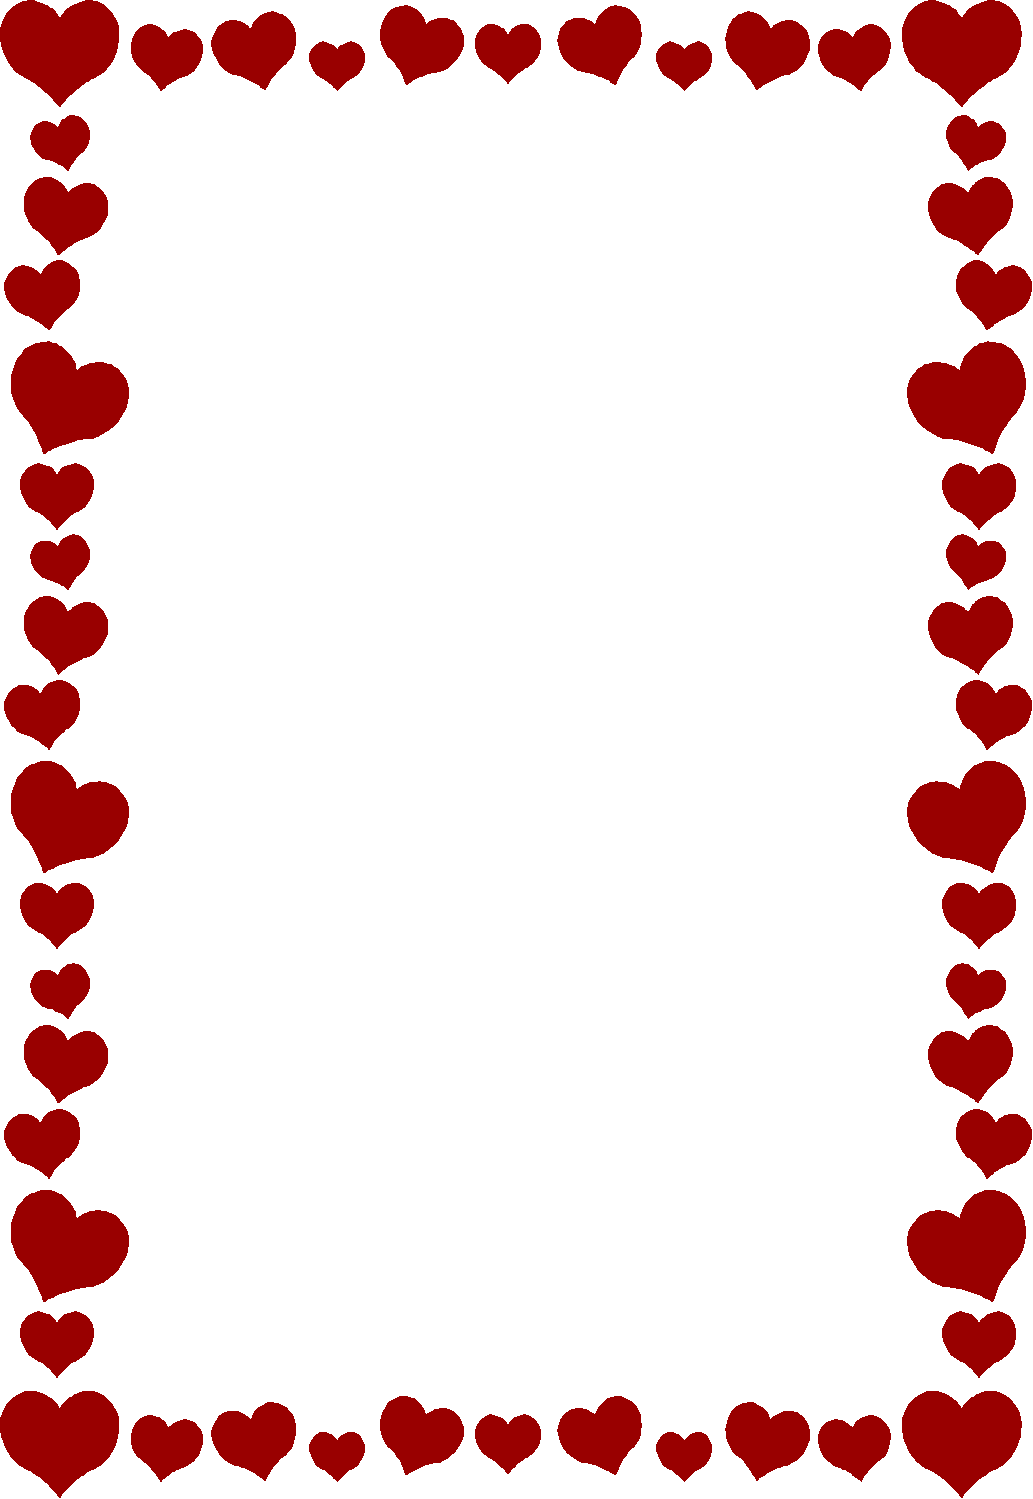 hearts clipart frame